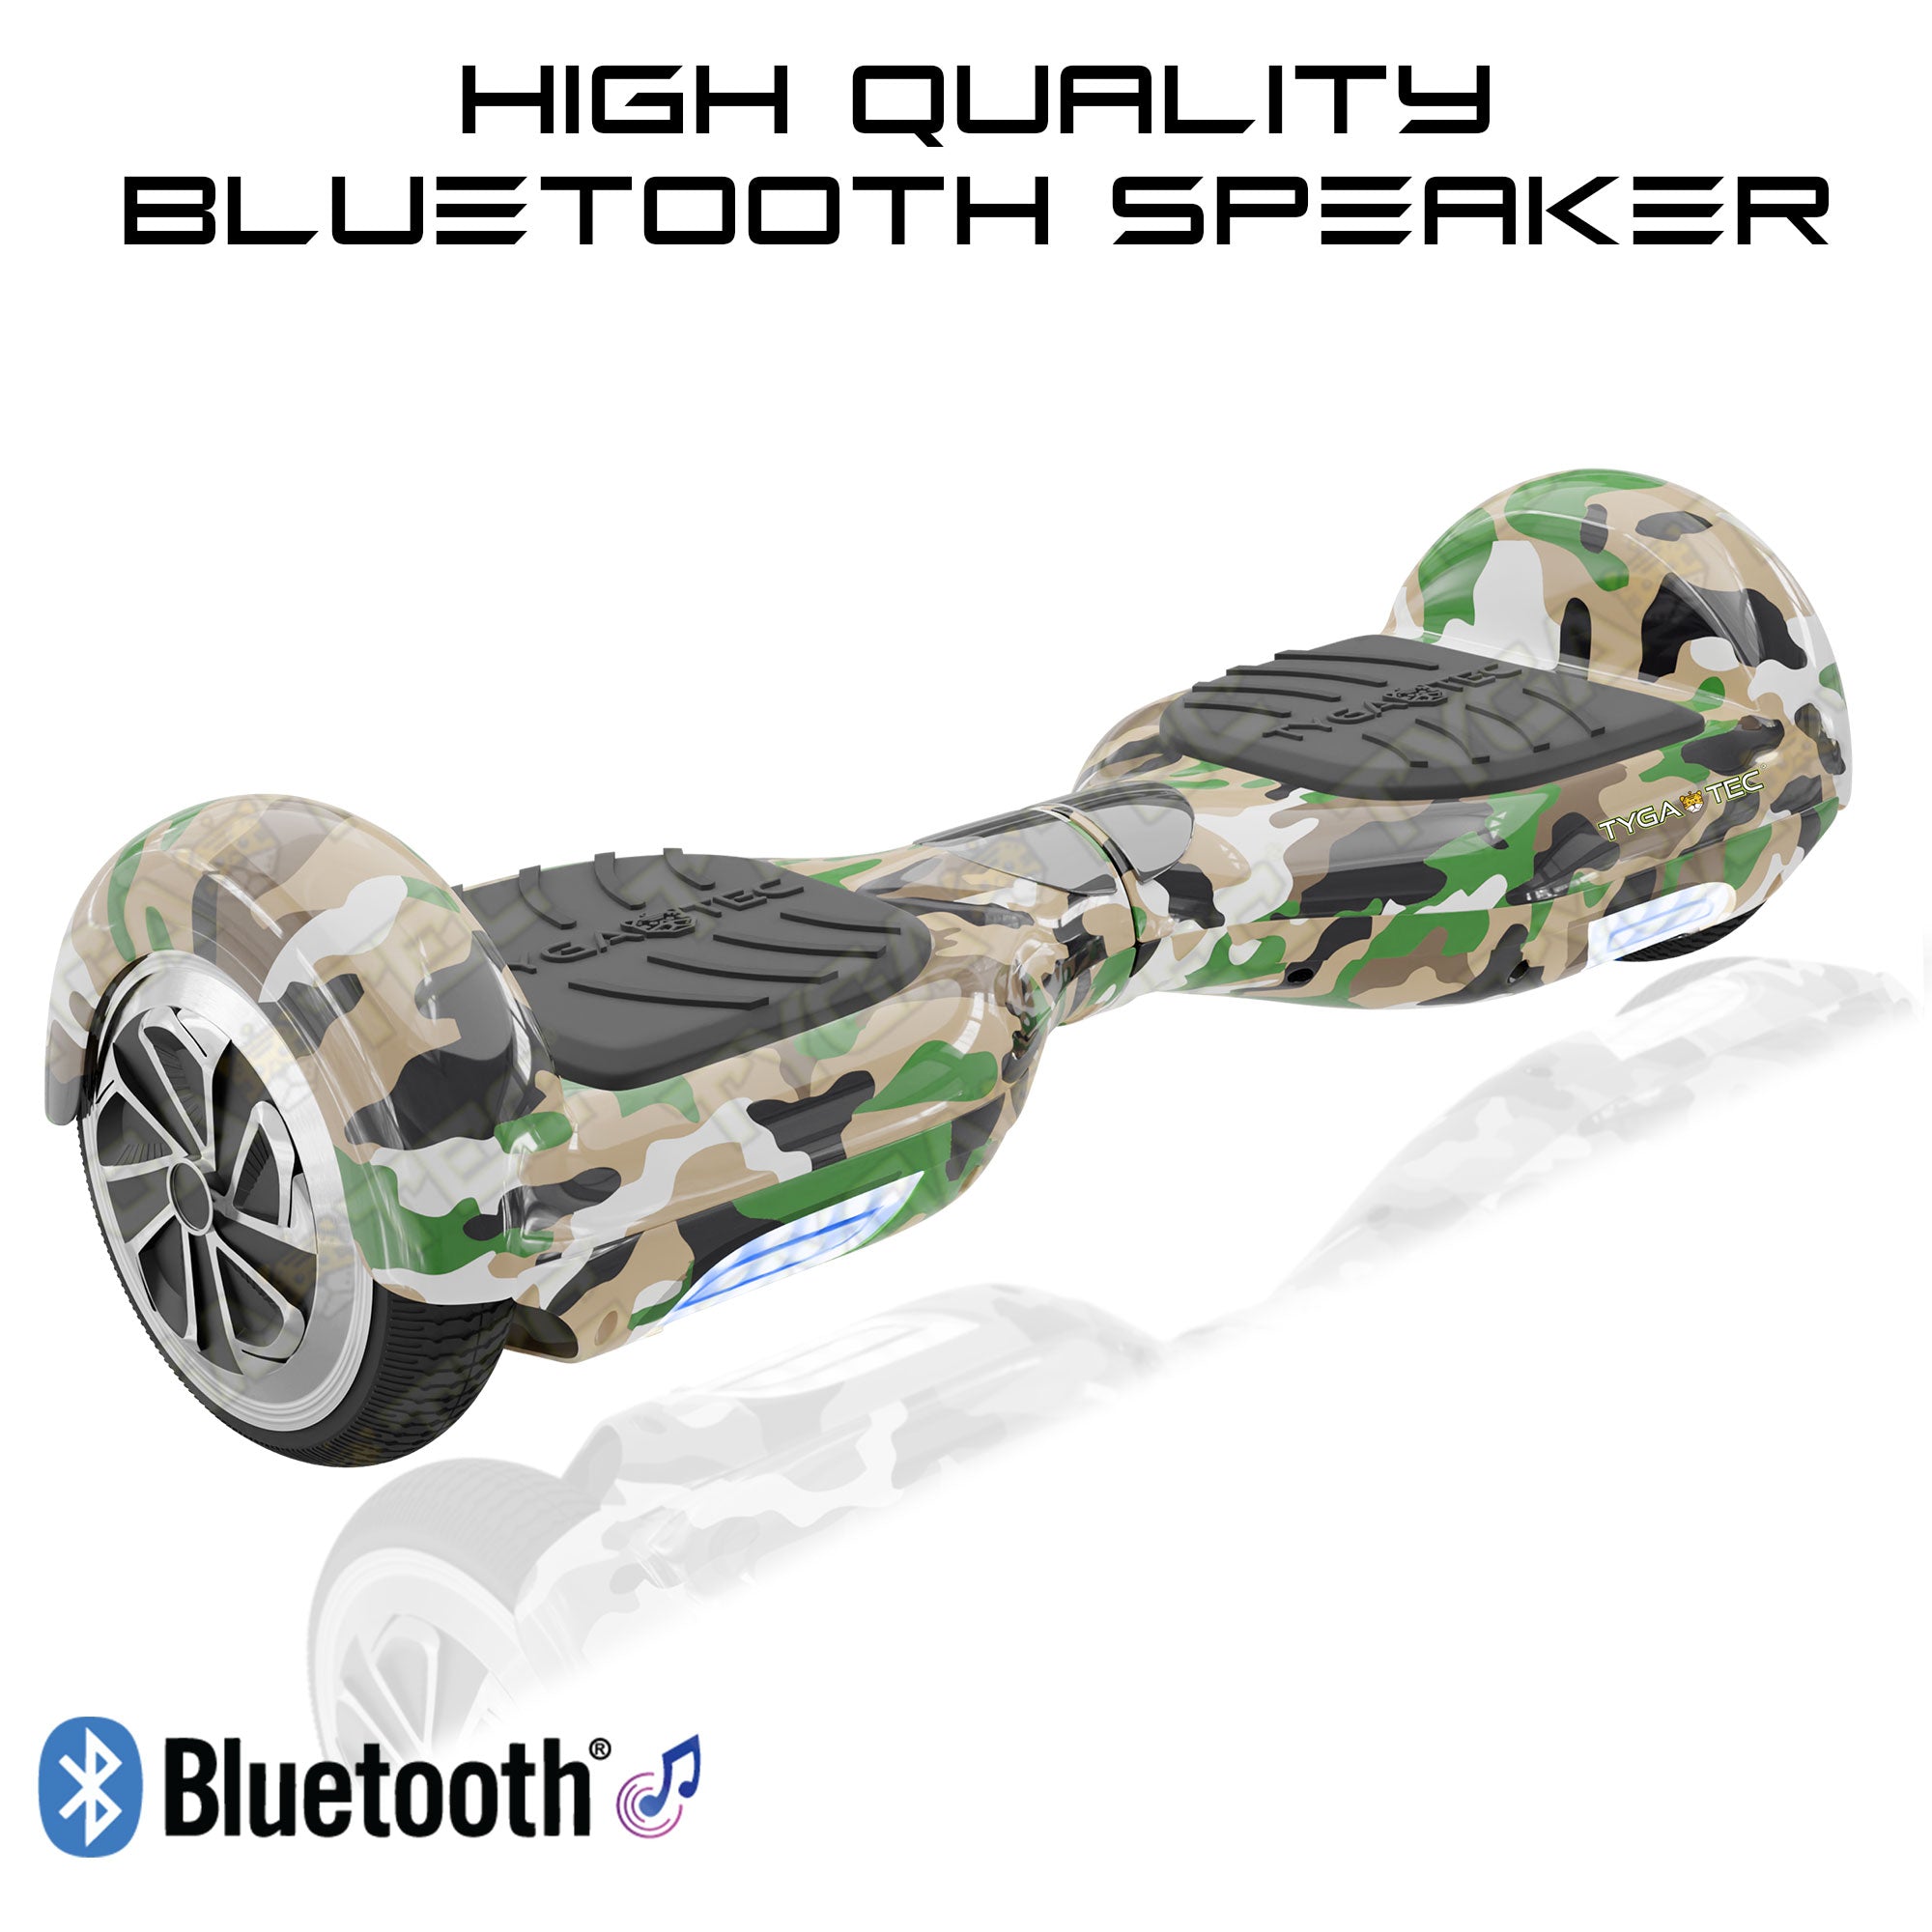 TYGATEC T2 + Auto Balancing Hoverboard App Connectivity - Military Green